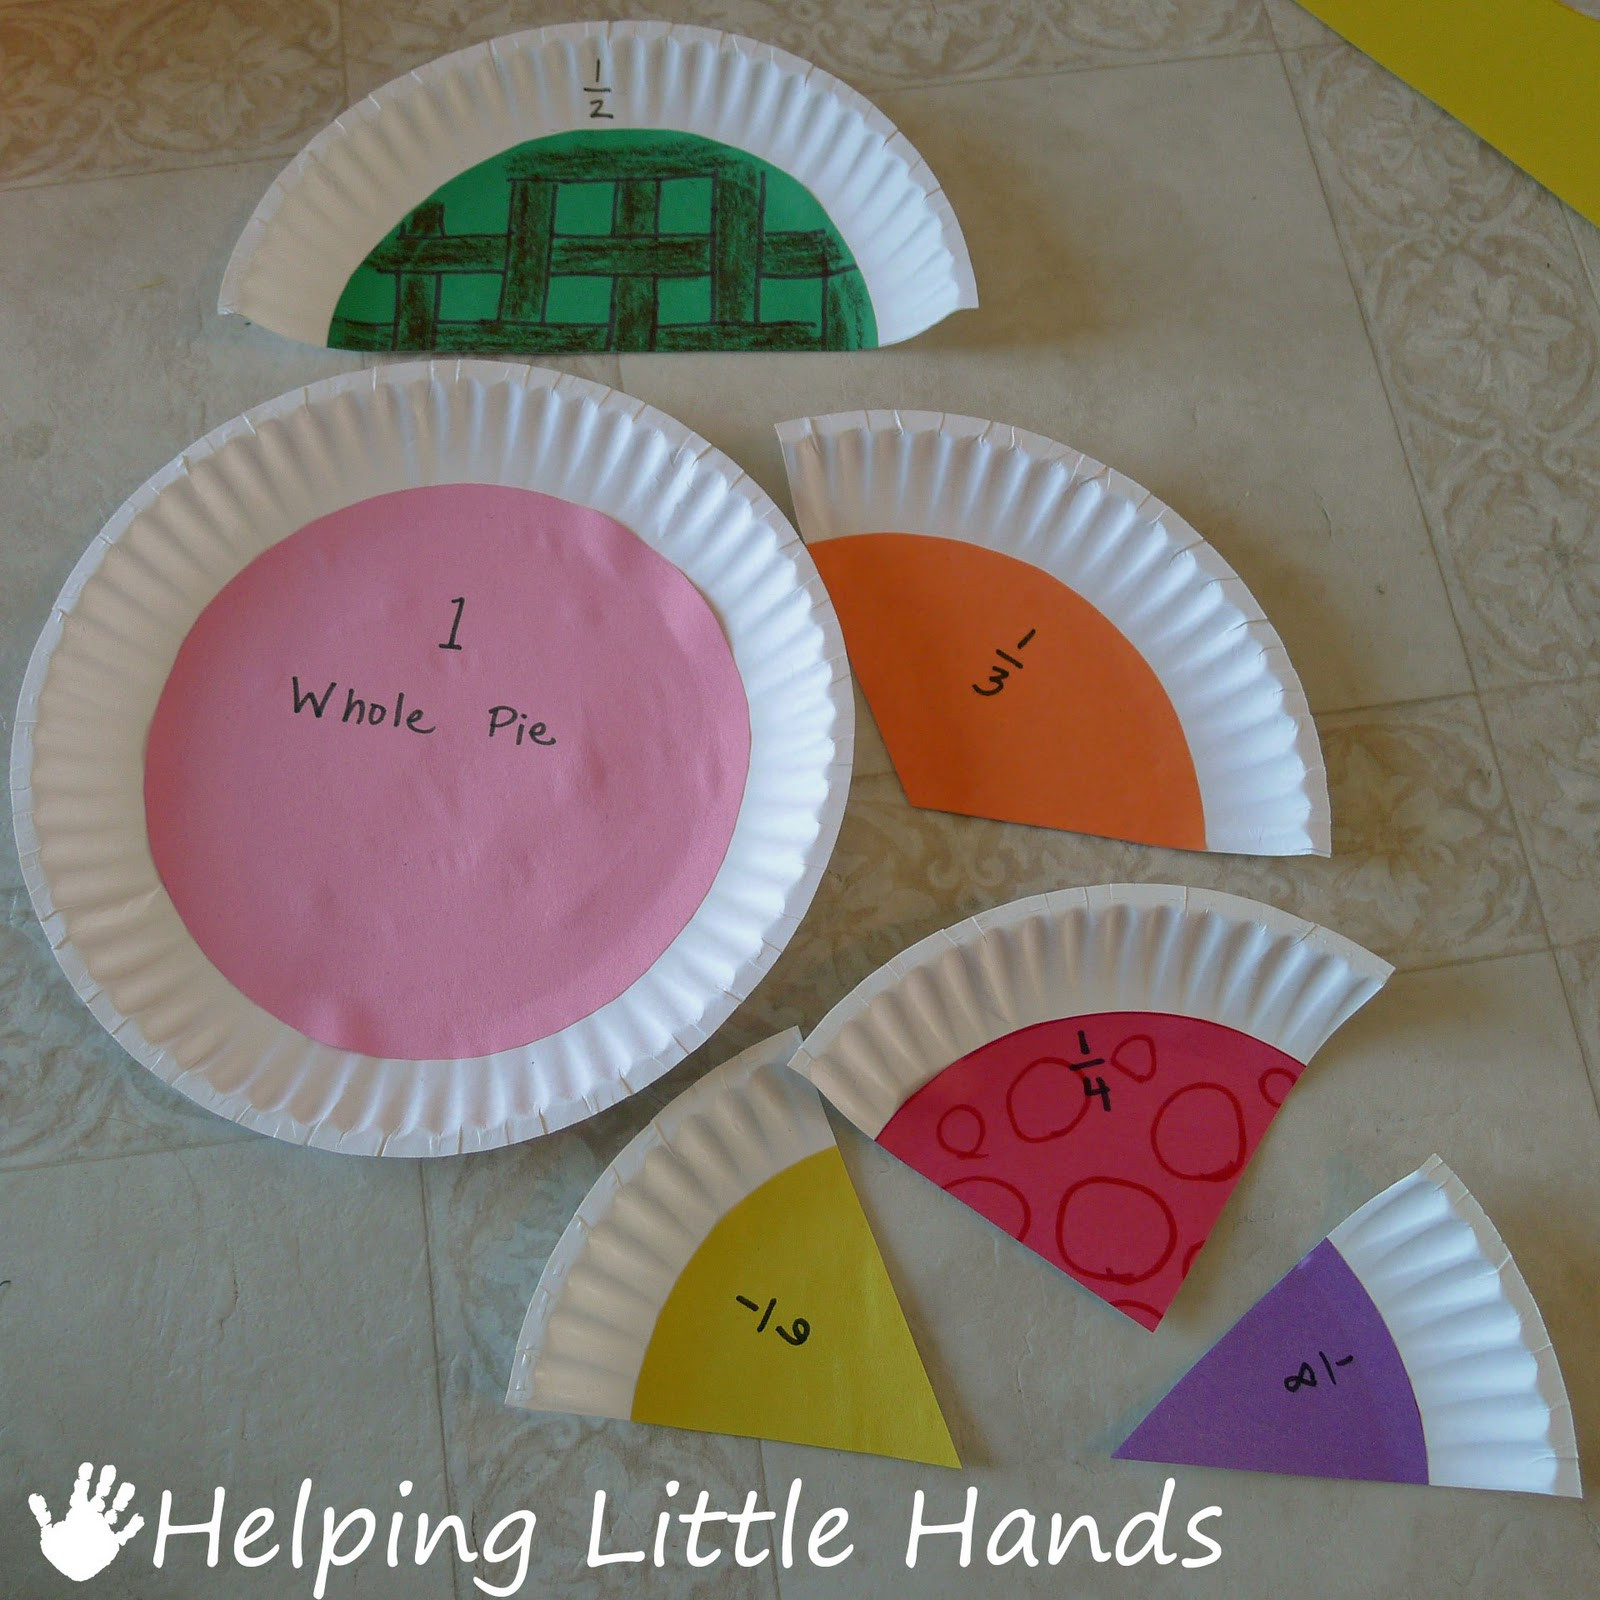 Pi Day Craft Ideas
 Pieces by Polly Kindergarten Pi Day Activities